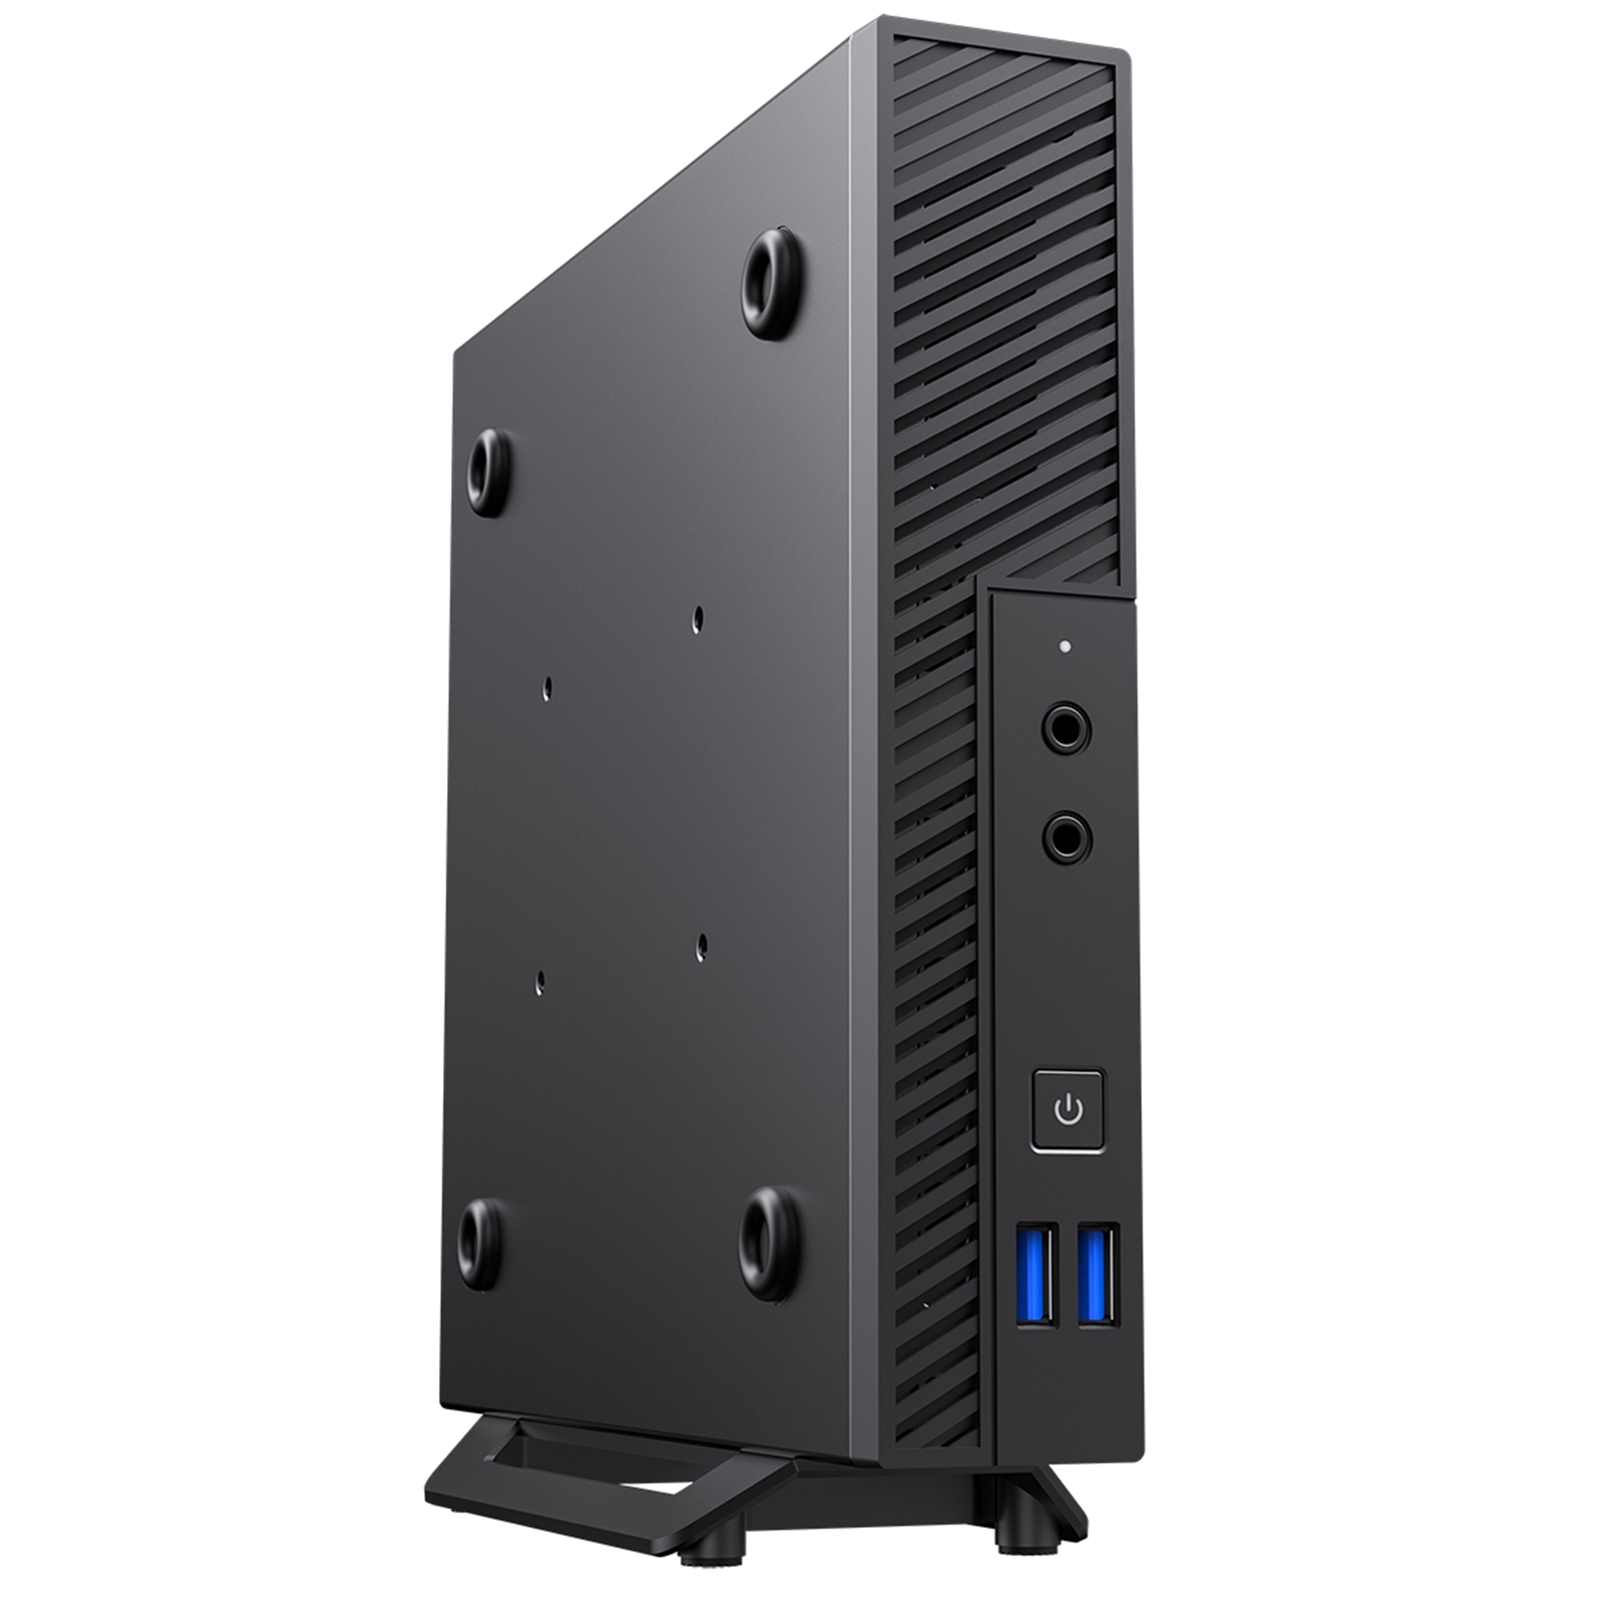 LOGIX Intel i5 12th Gen 6 Core 12 Threads 2.50GHz (4.40GHz Boost), 8GB RAM, 250GB NVMe, Windows 11 Pro - Small 1L Case VESA Mountable for Business Use